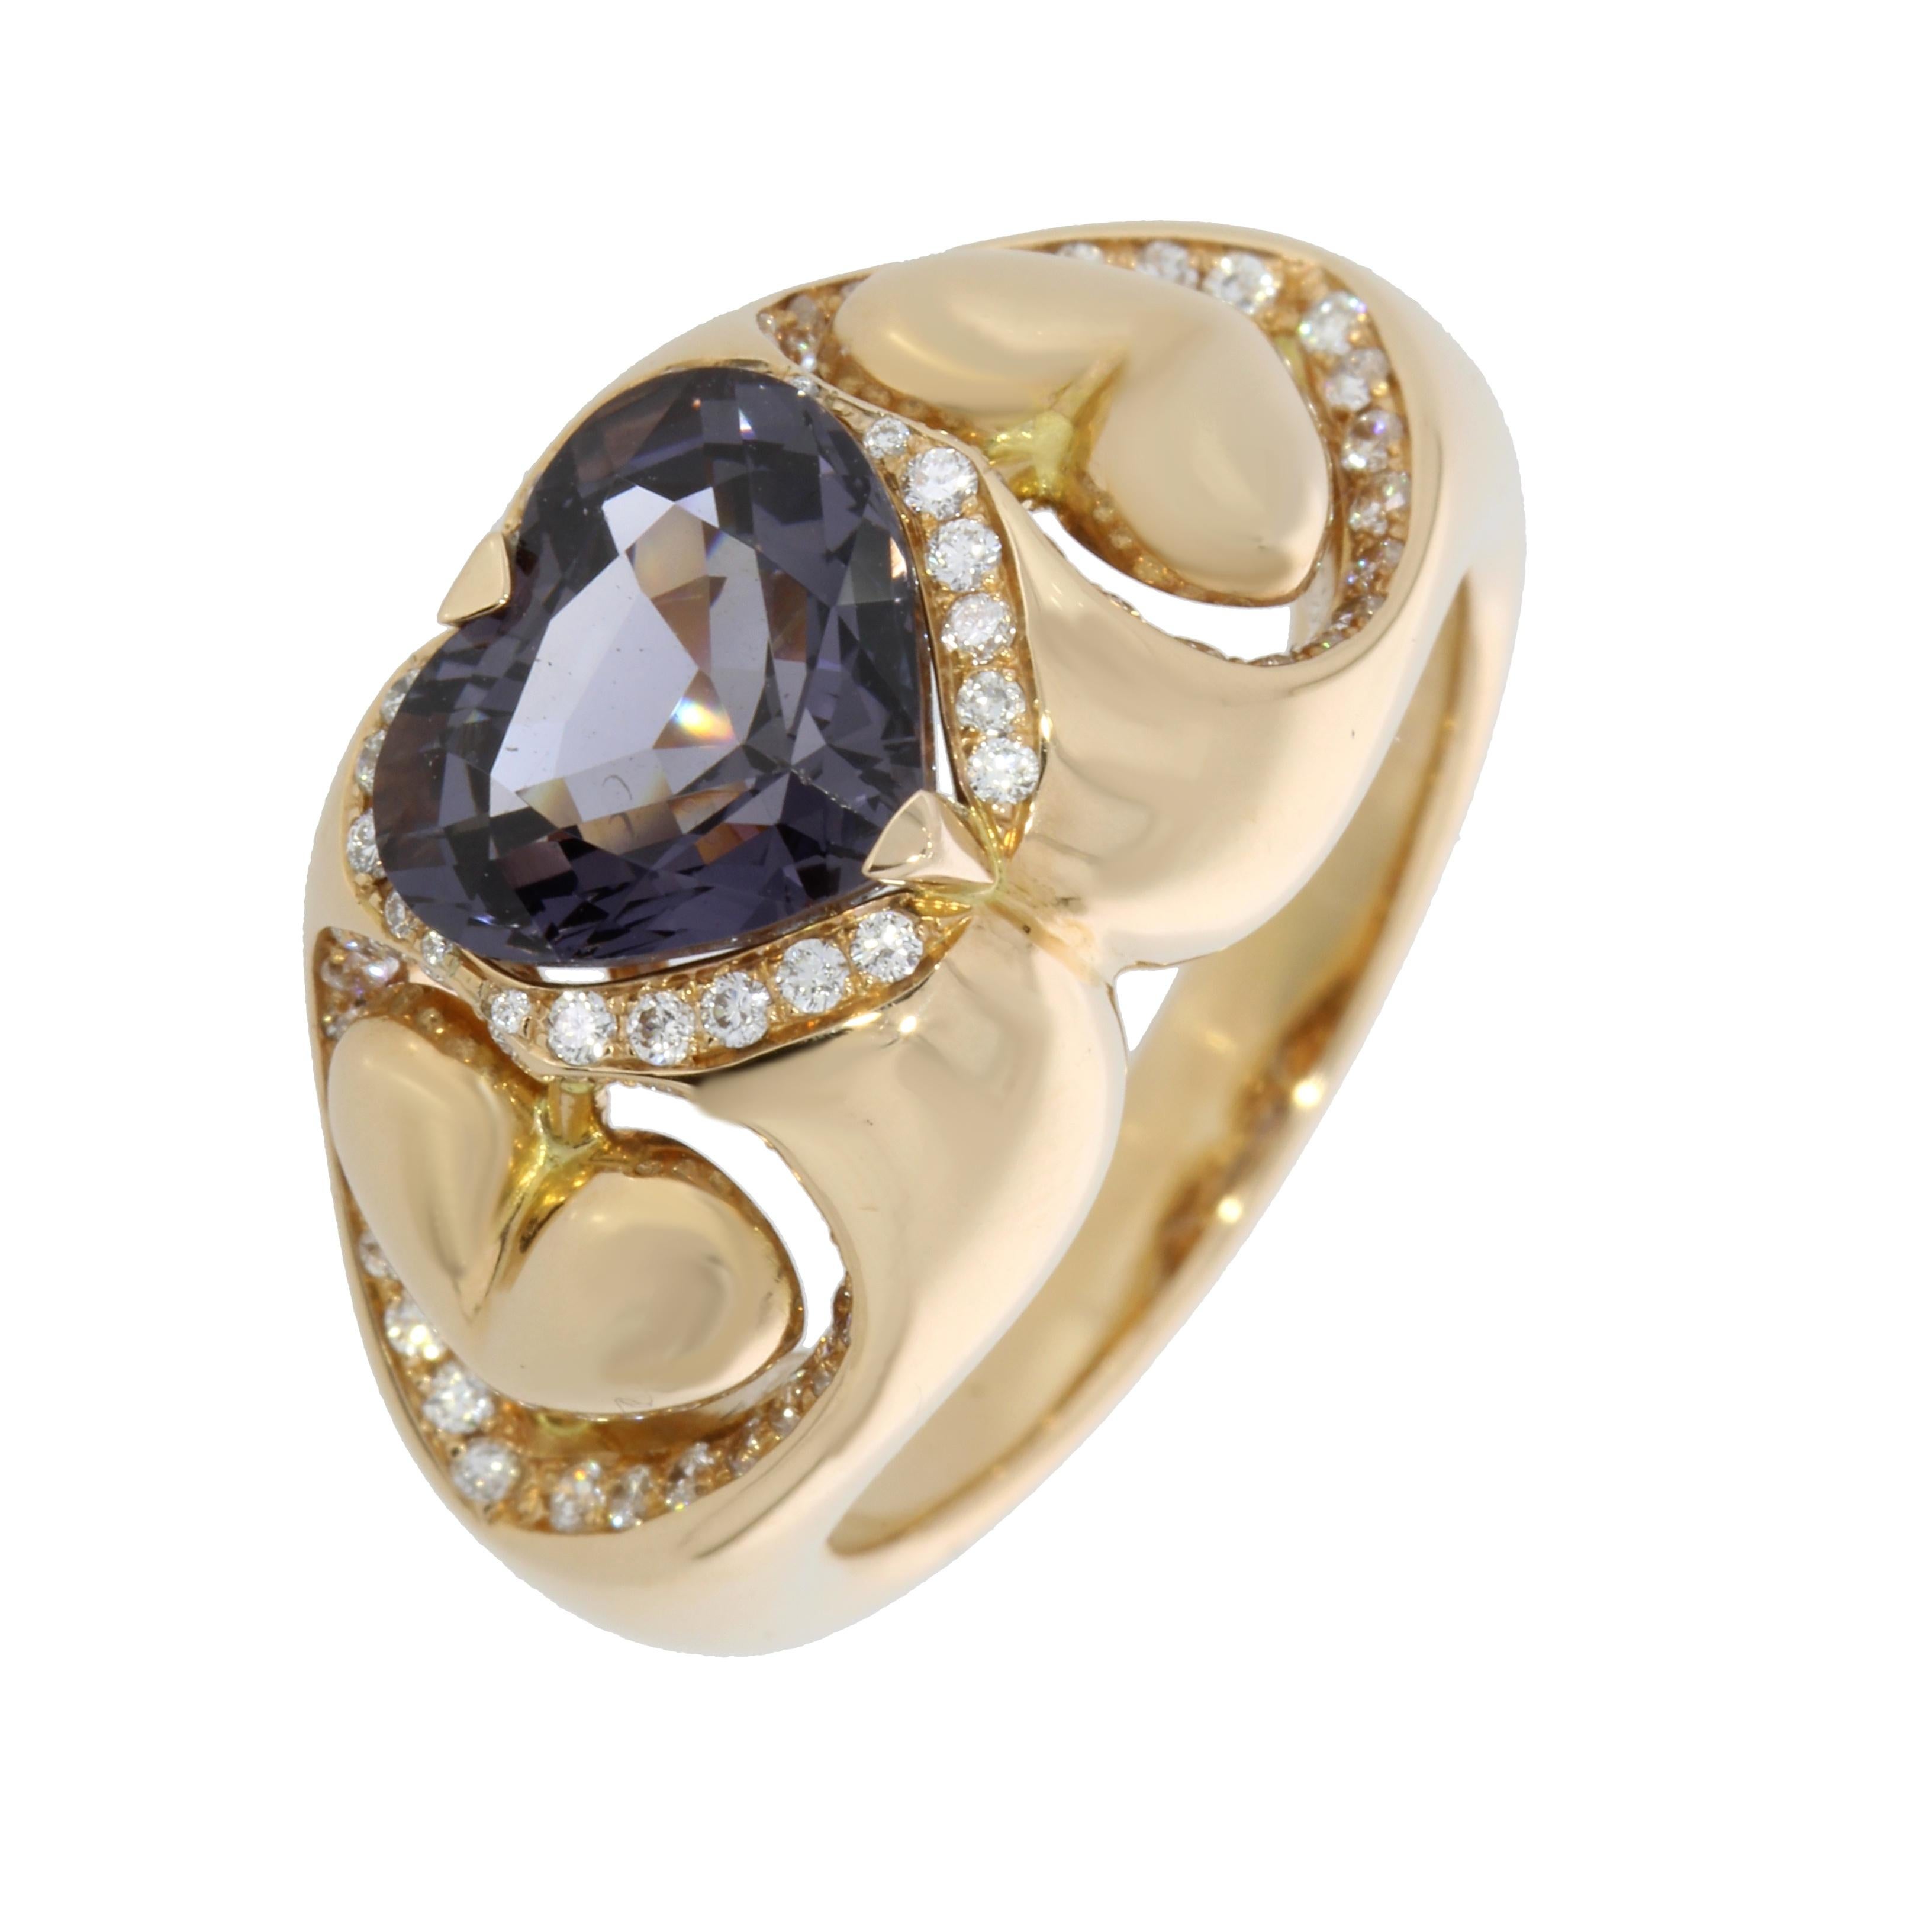 A captivating heart shaped Purple Spinel set between two suspended gold Hearts. The gold hearts are surrounded by a glittering pave of white round brilliant cut diamonds.

This ring is an original new engagement ring but also a the perfect present